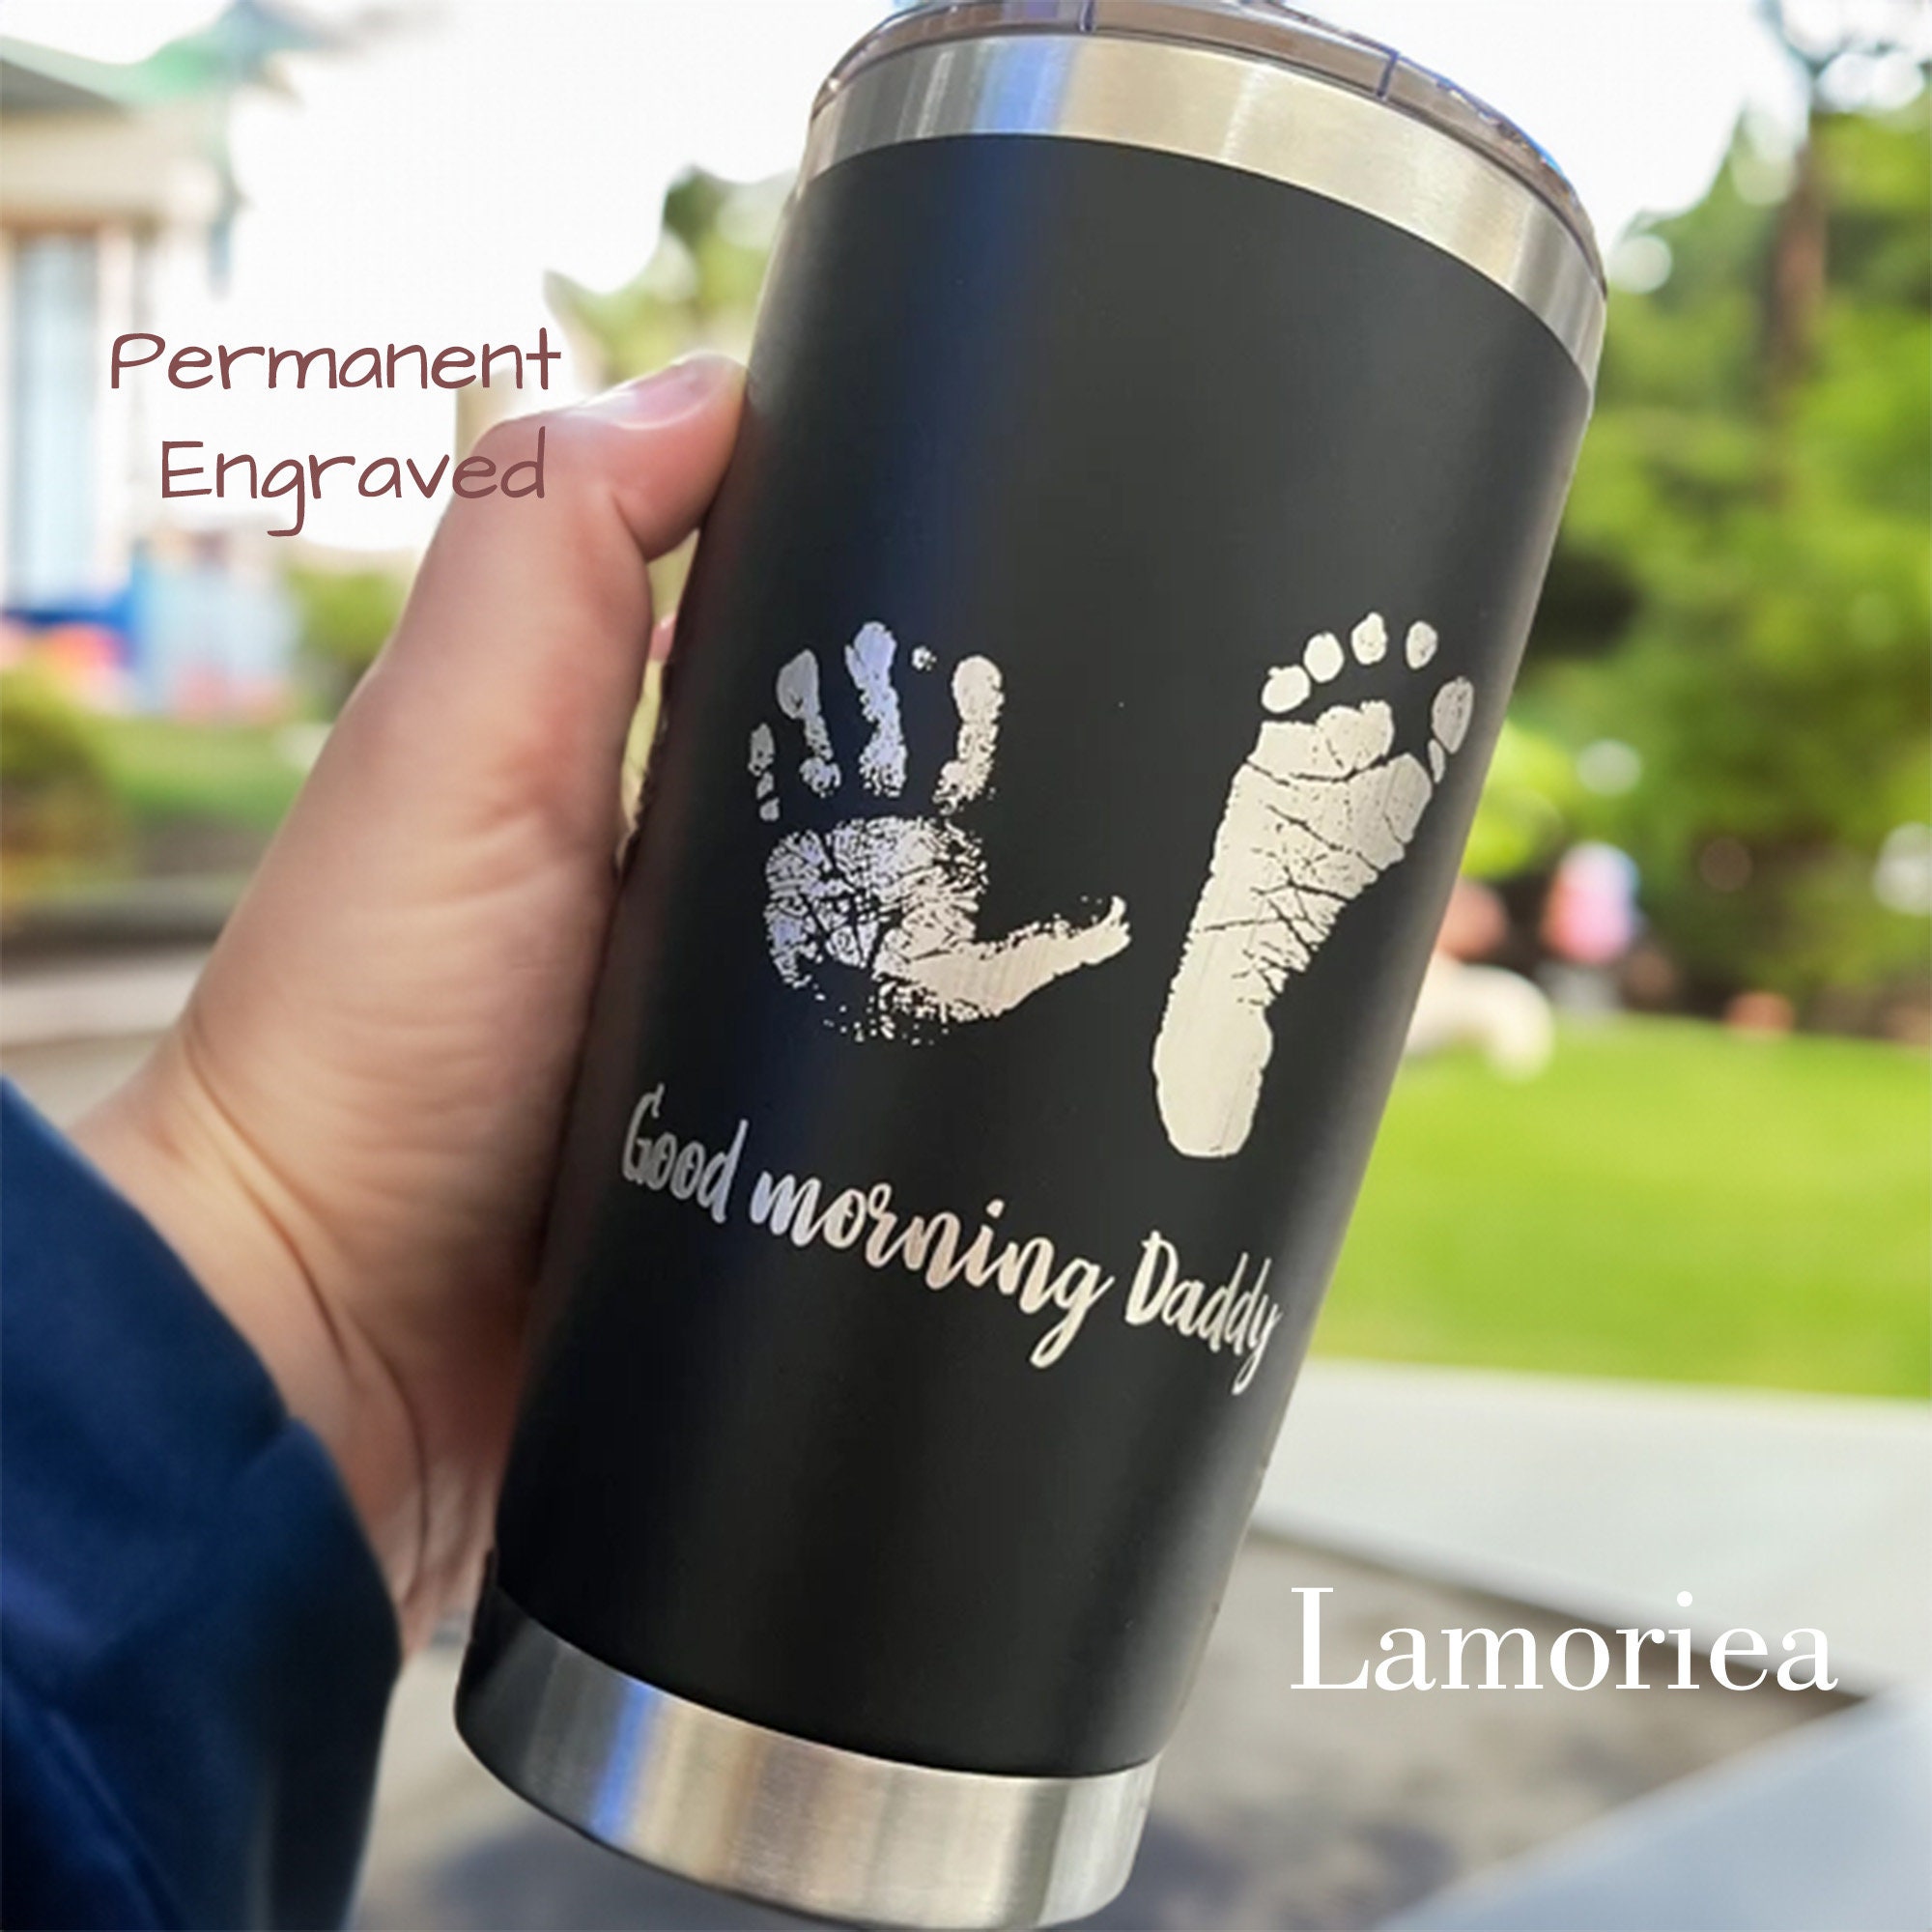 New Mom Tumbler-Gifts for First Time Mothers-Push Gifts for New Mommy-Ideas  for New Moms-Mom Tumblers-20 oz Iced Coffee Tumbler With Straw Cover Mom